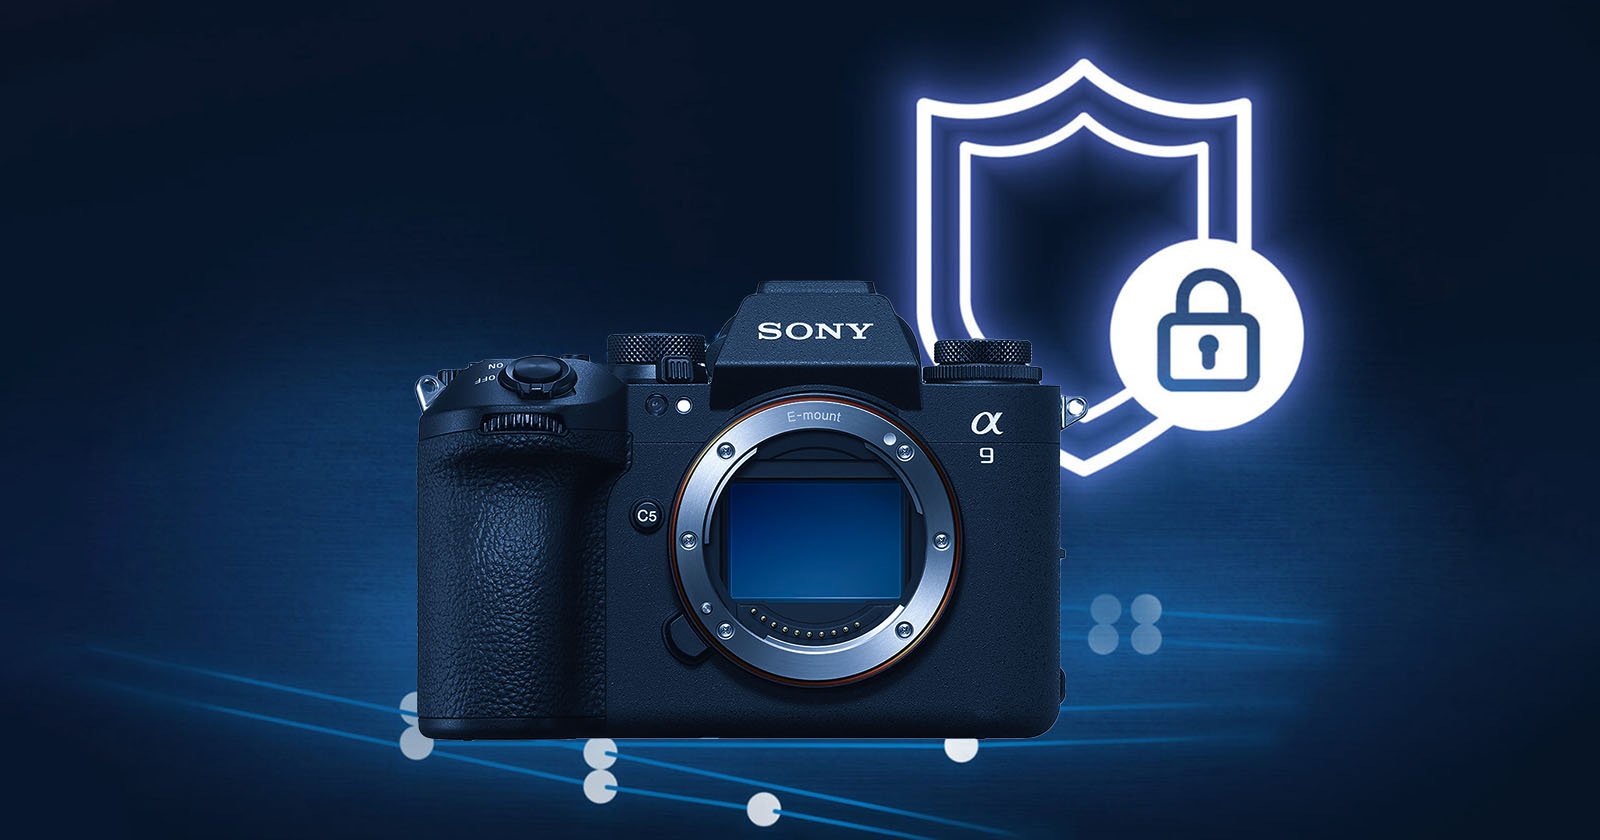 Sony's In-Camera Authentication Technology Passes AP's Tests